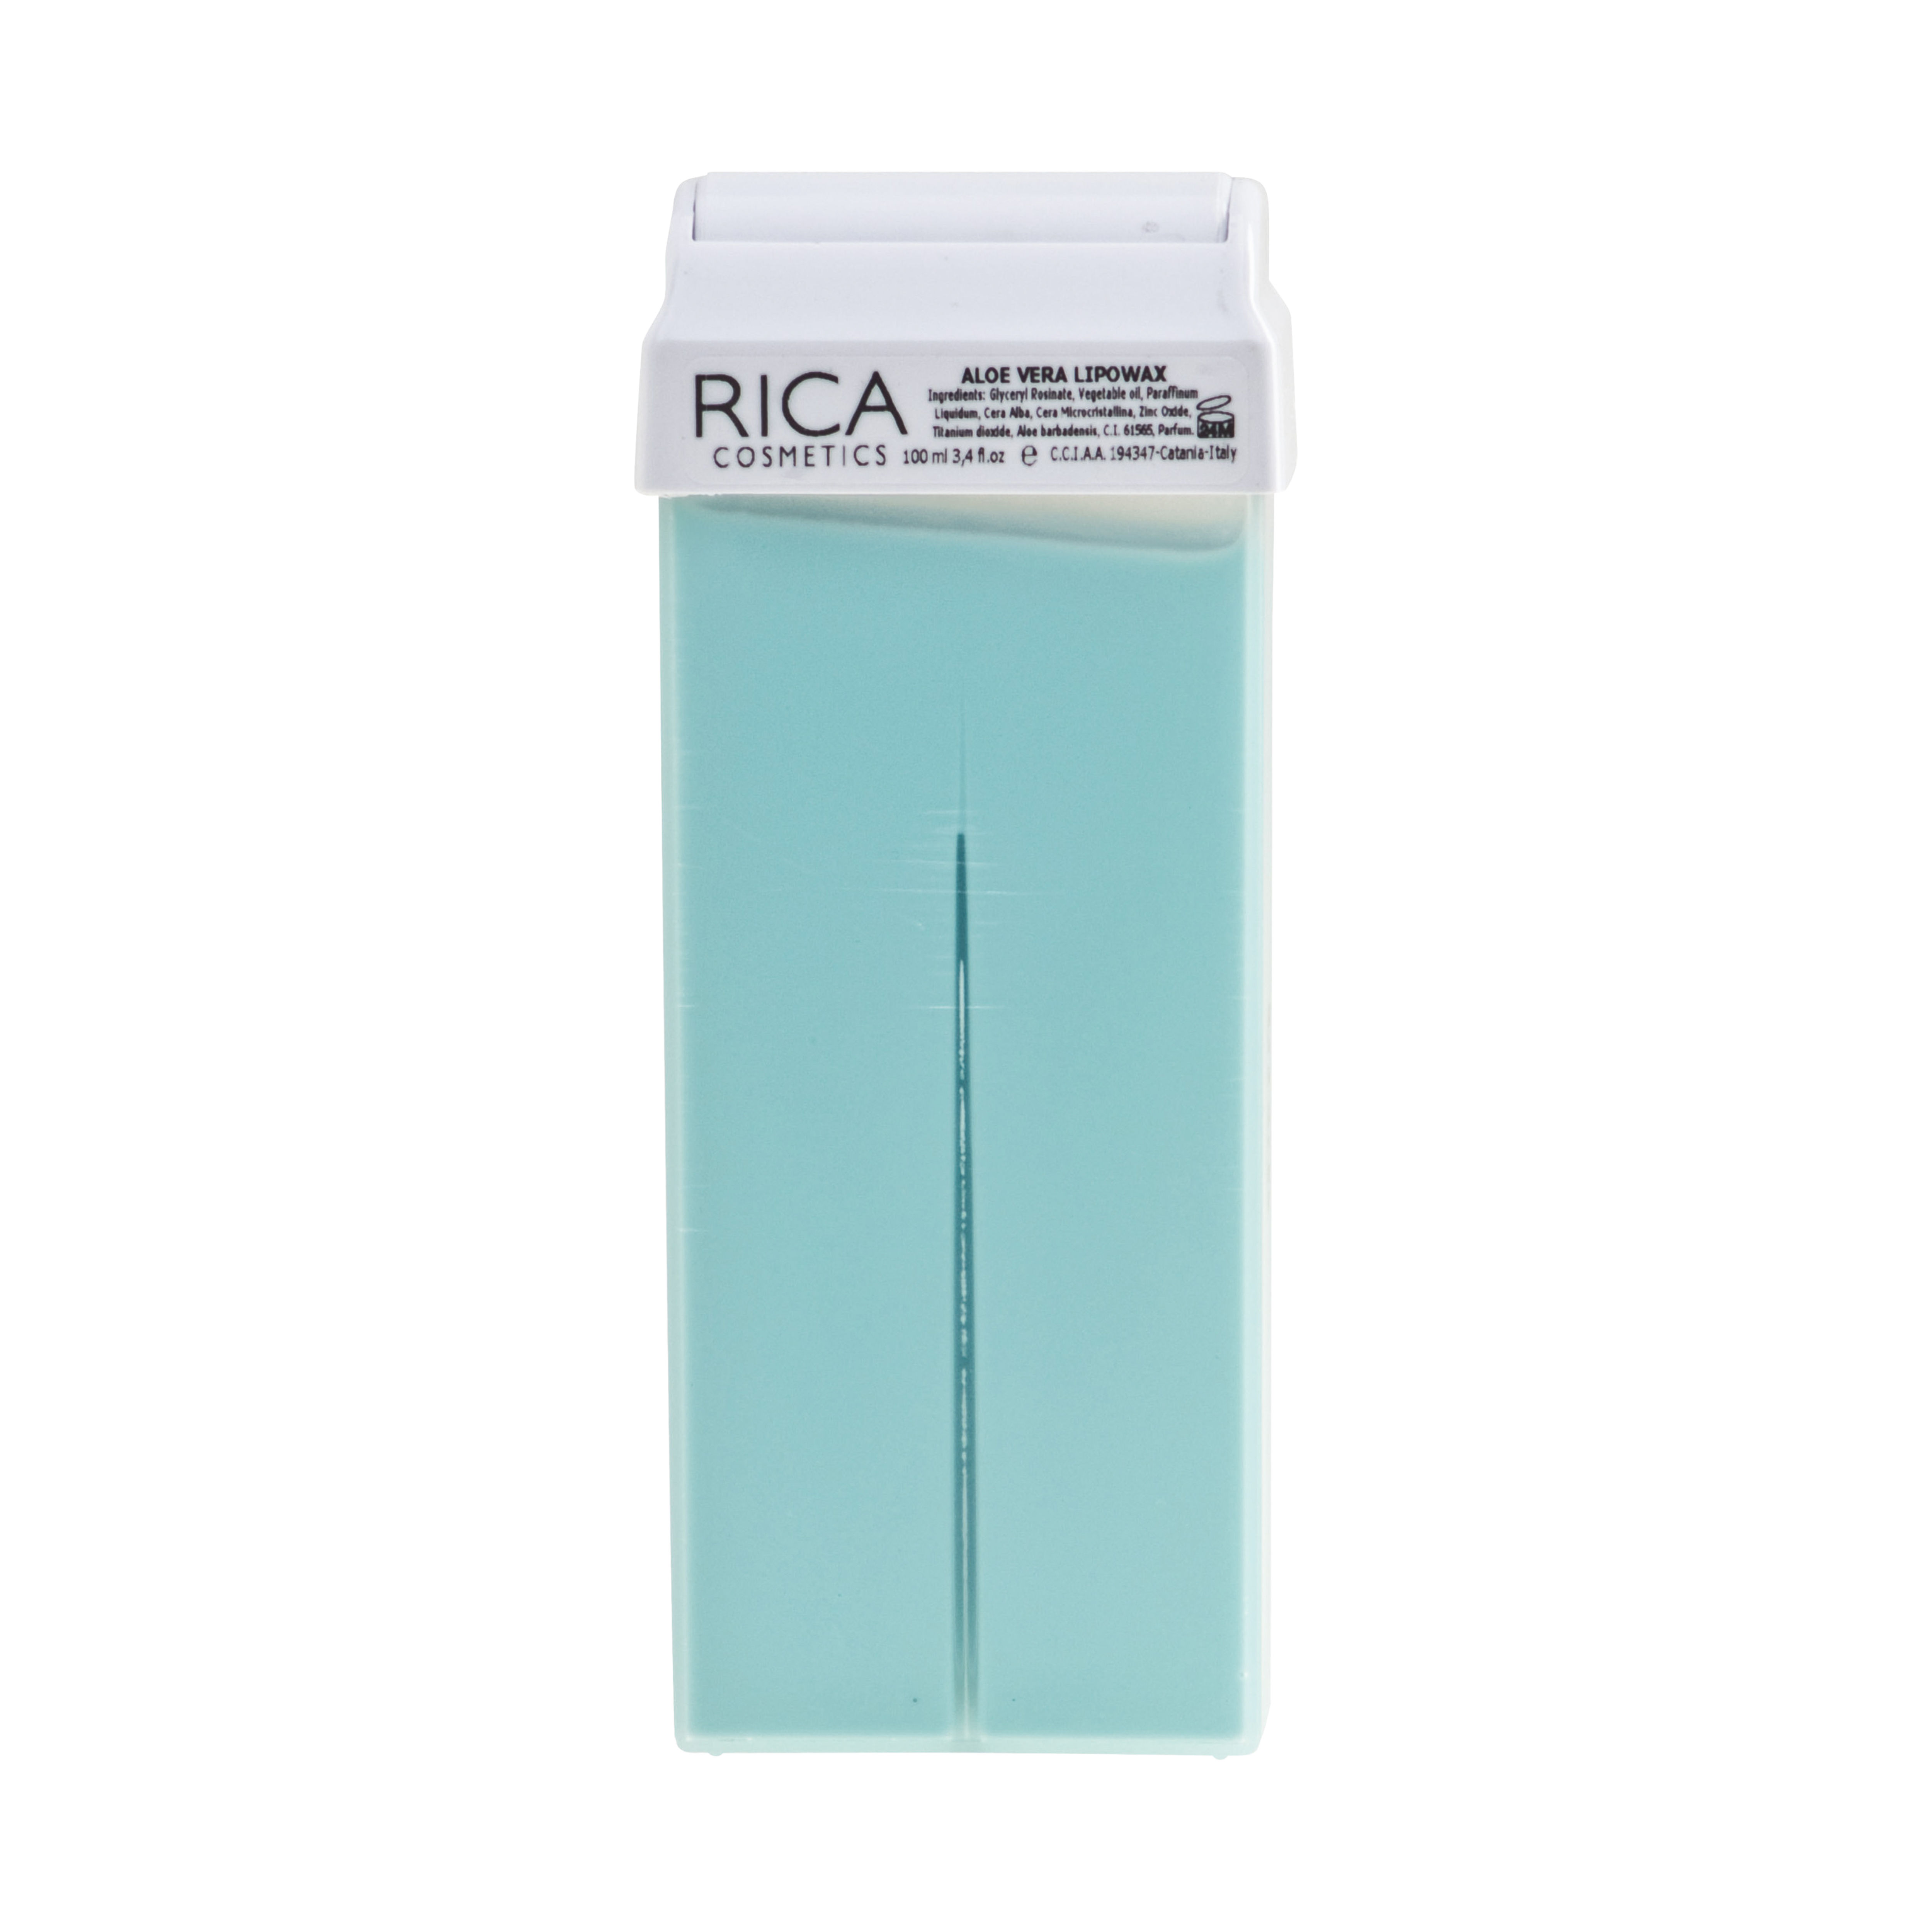 Rica Aloevera Liposoluable Wax Refill For Sensitive Skin With Glyceryl Rosinate & Natural Beeswax